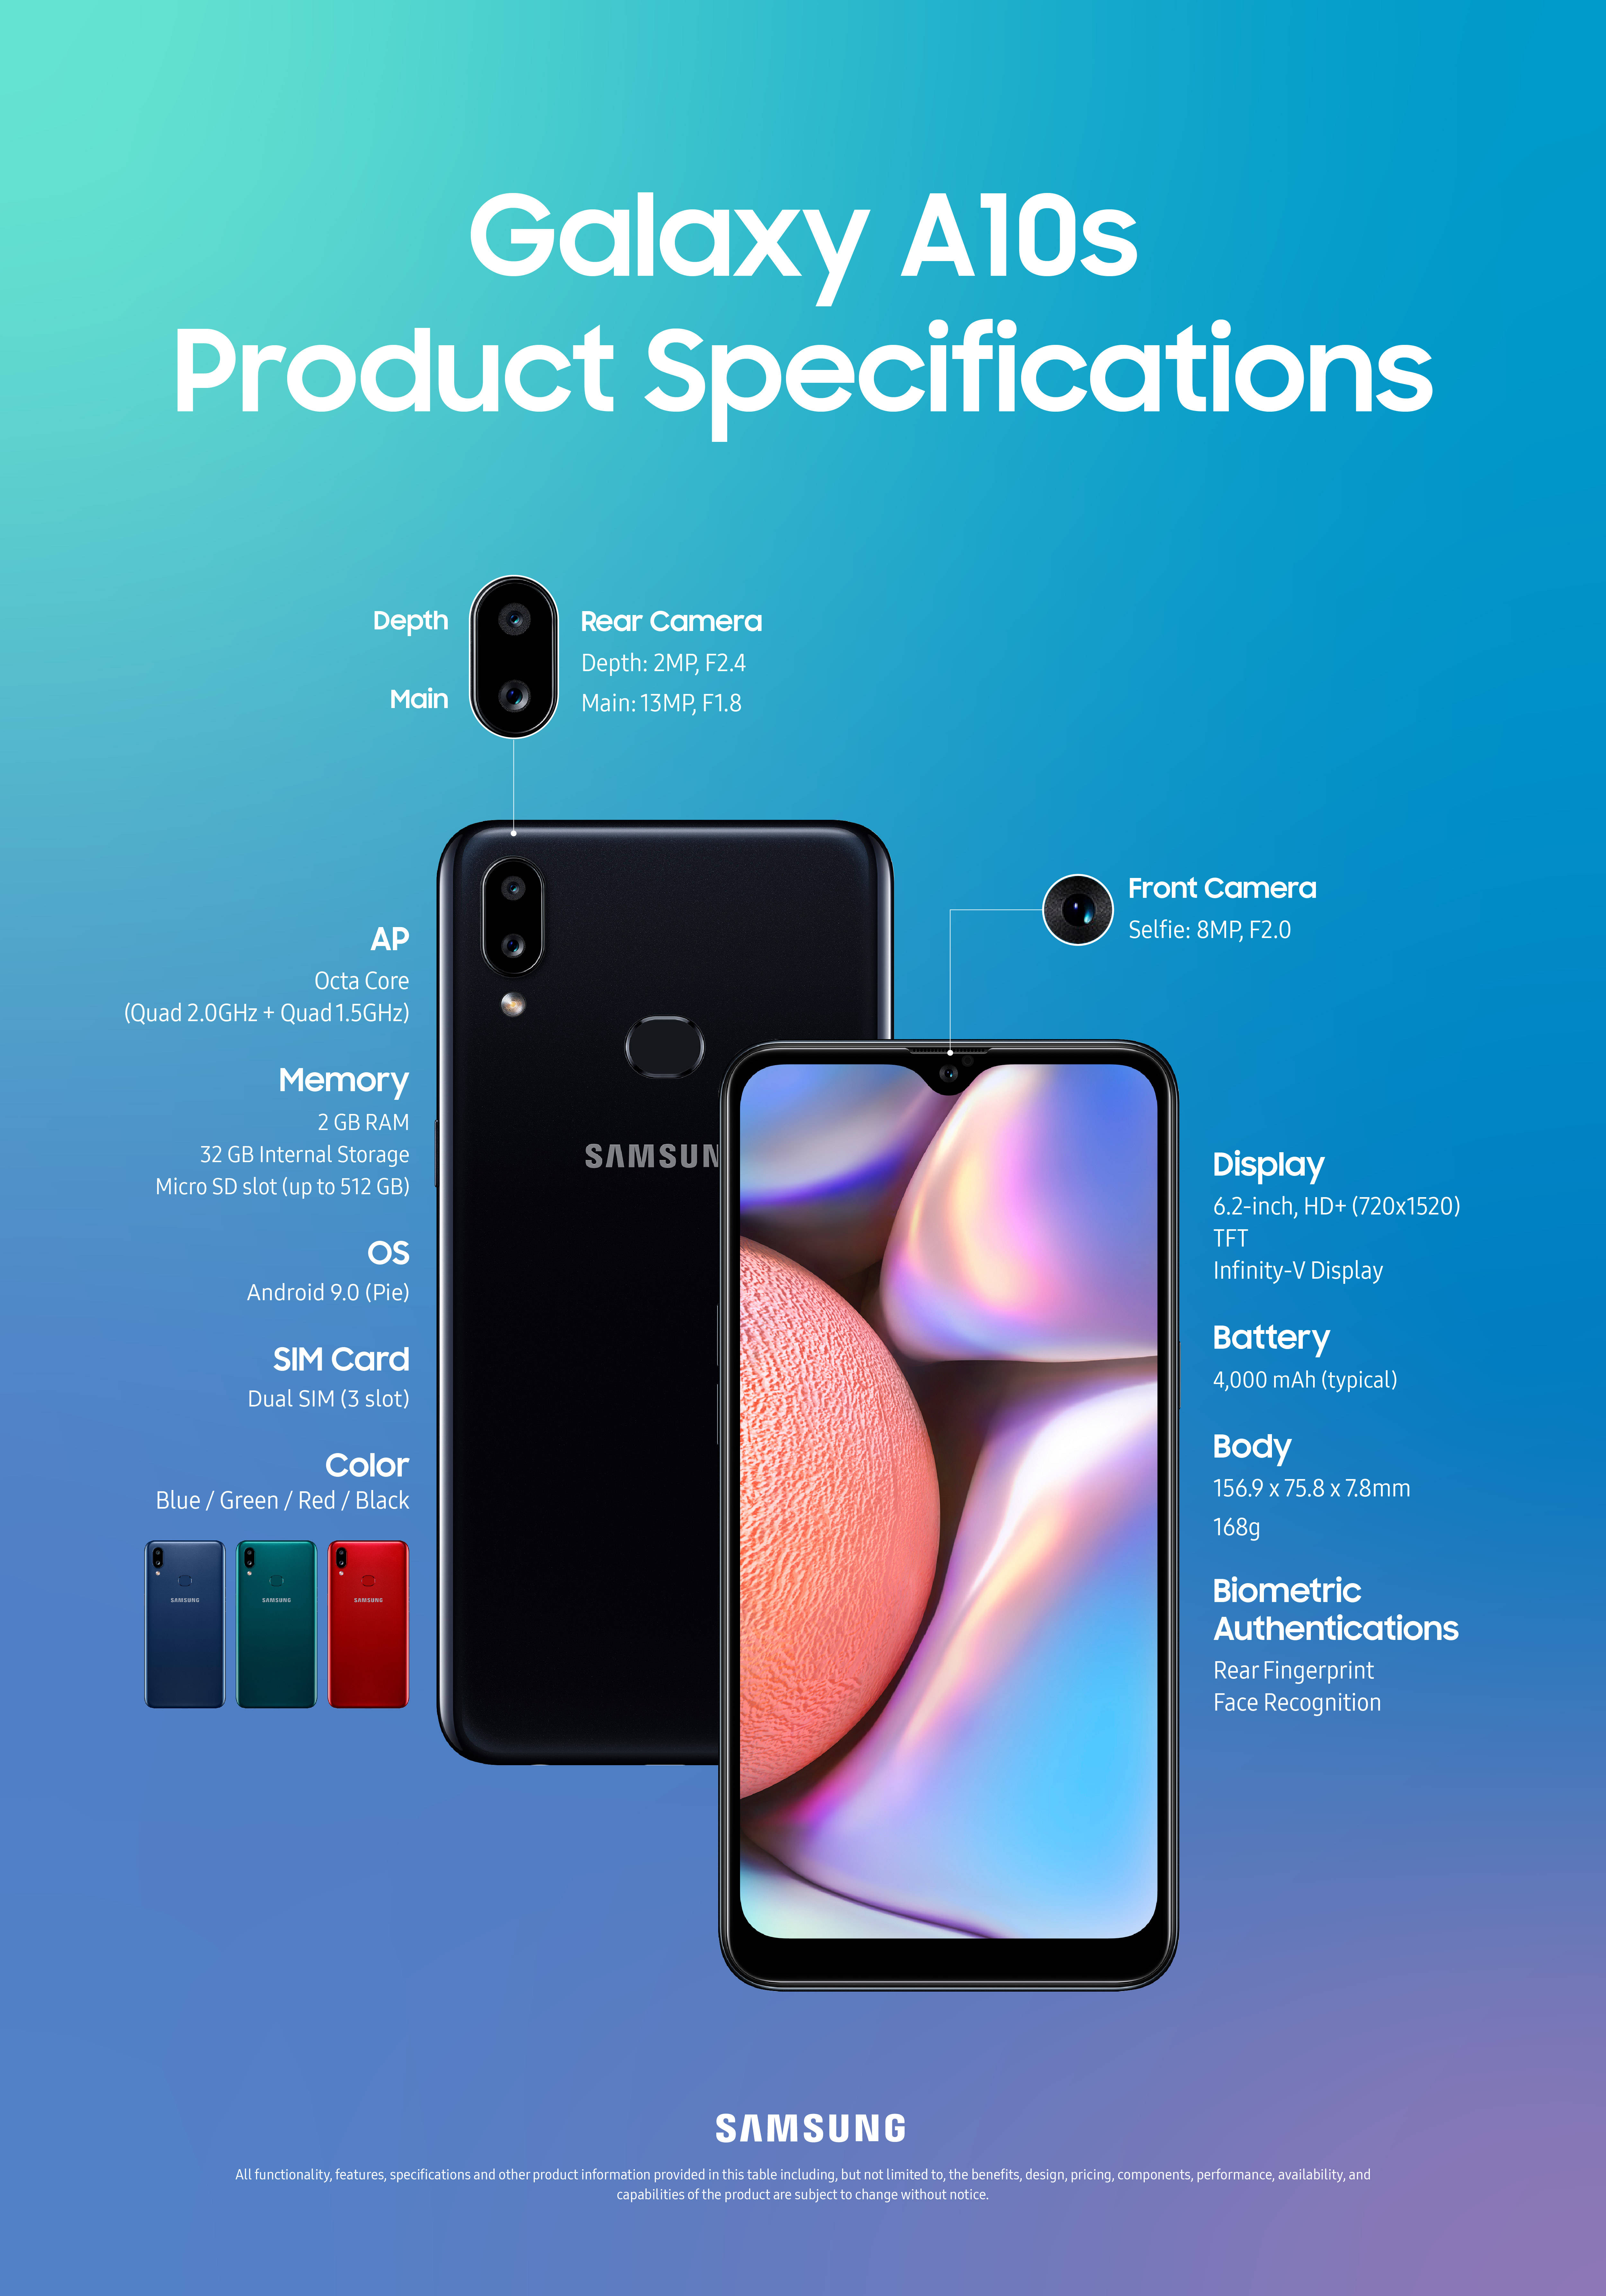 Samsung Galaxy A10s officially revealed. Specs